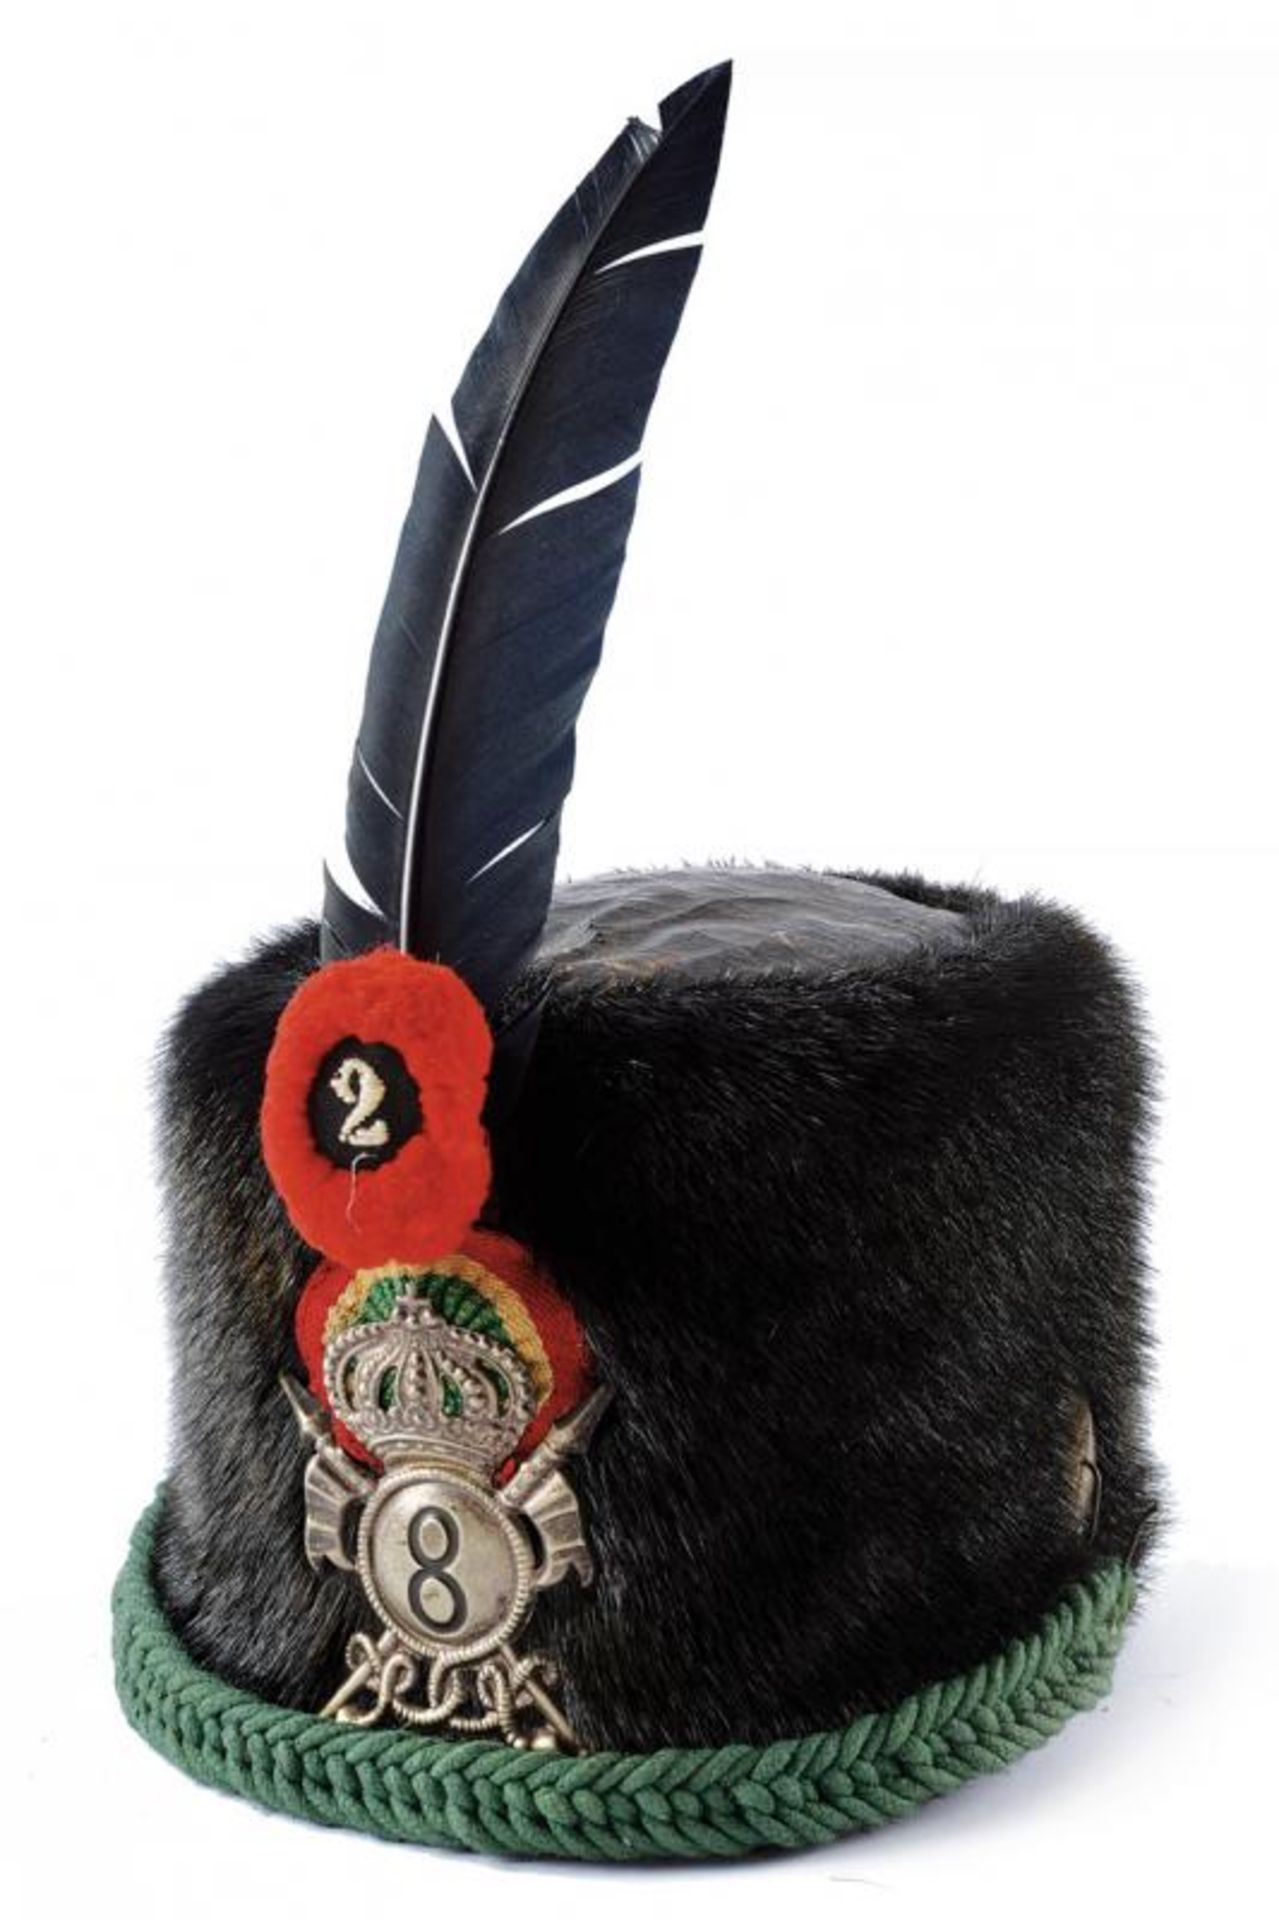 A cavalry trooper's bearskin from the 8th lancers regiment Montebello